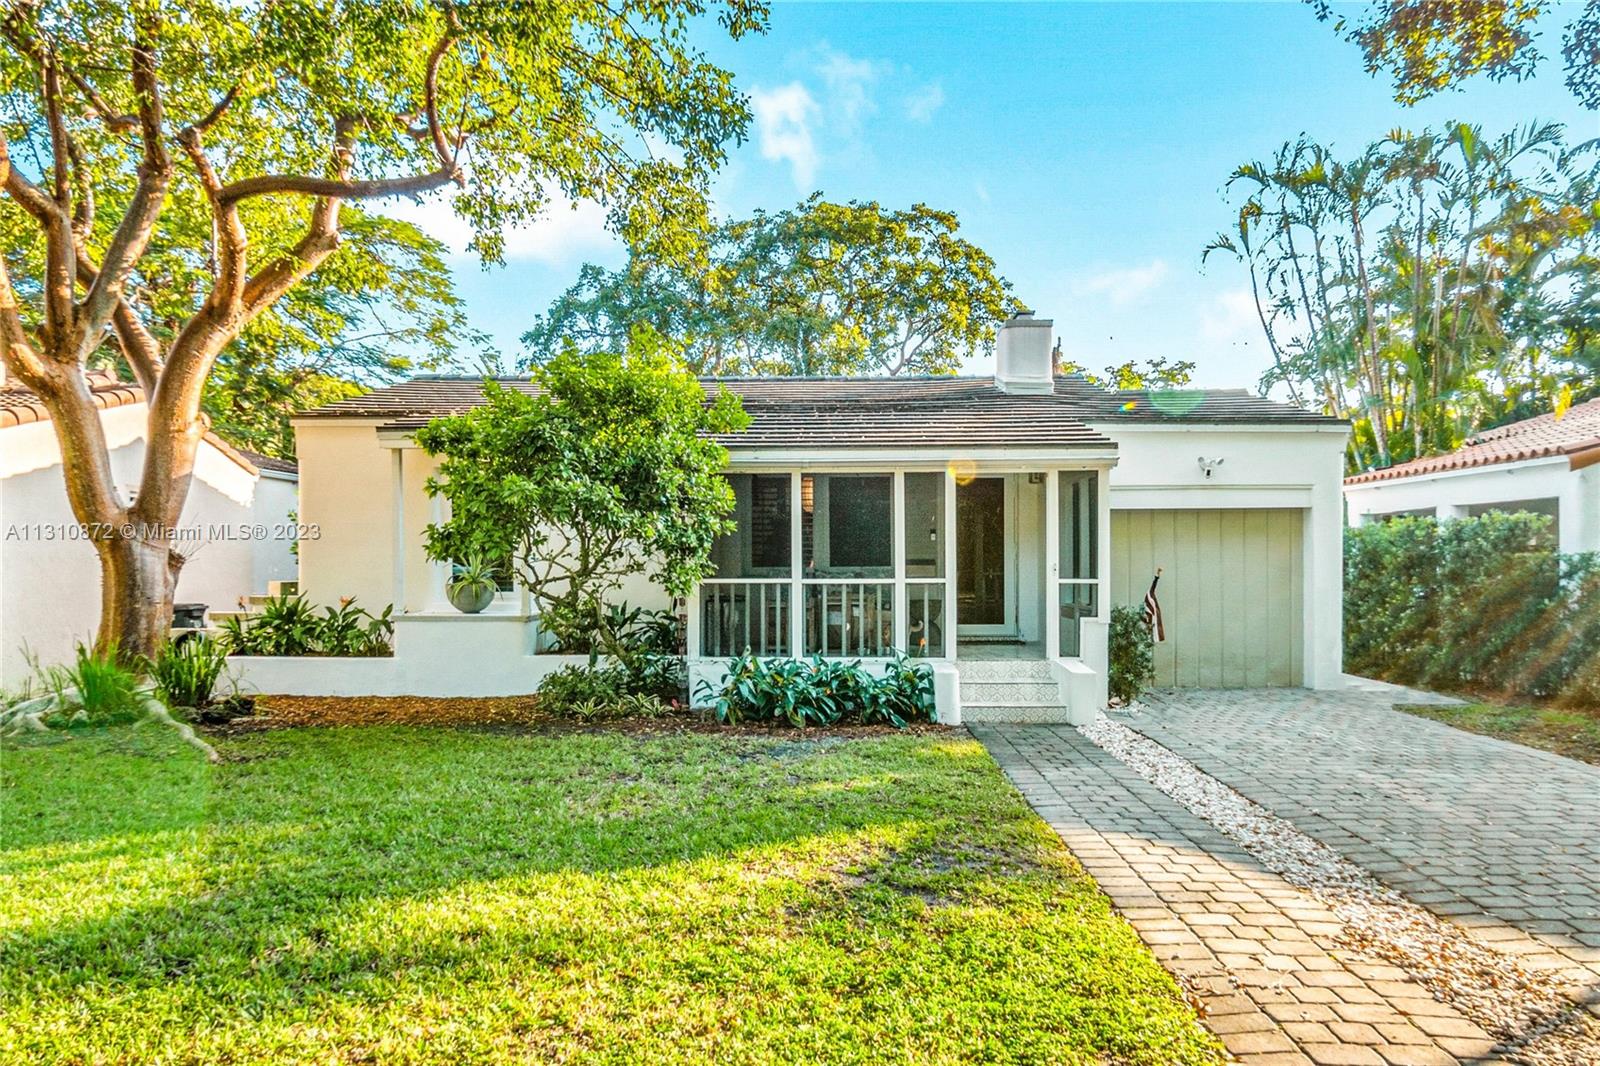 Fall in Love with this 1078sf 3/1 charming Coral Gables completely modernized Bungalow. Enchanting outdoor entertaining retreat in Lush tropical setting- elegant lighting, New Salt Water Essig pool, pergola, summer kitchen, fire pit. Brand new Kabinart Chef’s dream top of the line kitchen. Miele Appliances, quartz countertop, floating shelves. Impact windows, Plantation shutters, Hard Wood floors preserved under luxe Bella Citta in grained laminate. Separate entrance for 3rd bedroom/office and laundry room with porcelain wood tiles. Perfect location! Steps away from Downtown Coral Gables/Miracle Mile dining & shopping. Mins to Granada Golf Course, Venetian Pool, A+ schools. Working Fireplace. New California Closets, doors/hardware, Waterworks Bathroom, AC & Roof 2020 + many more upgrades.